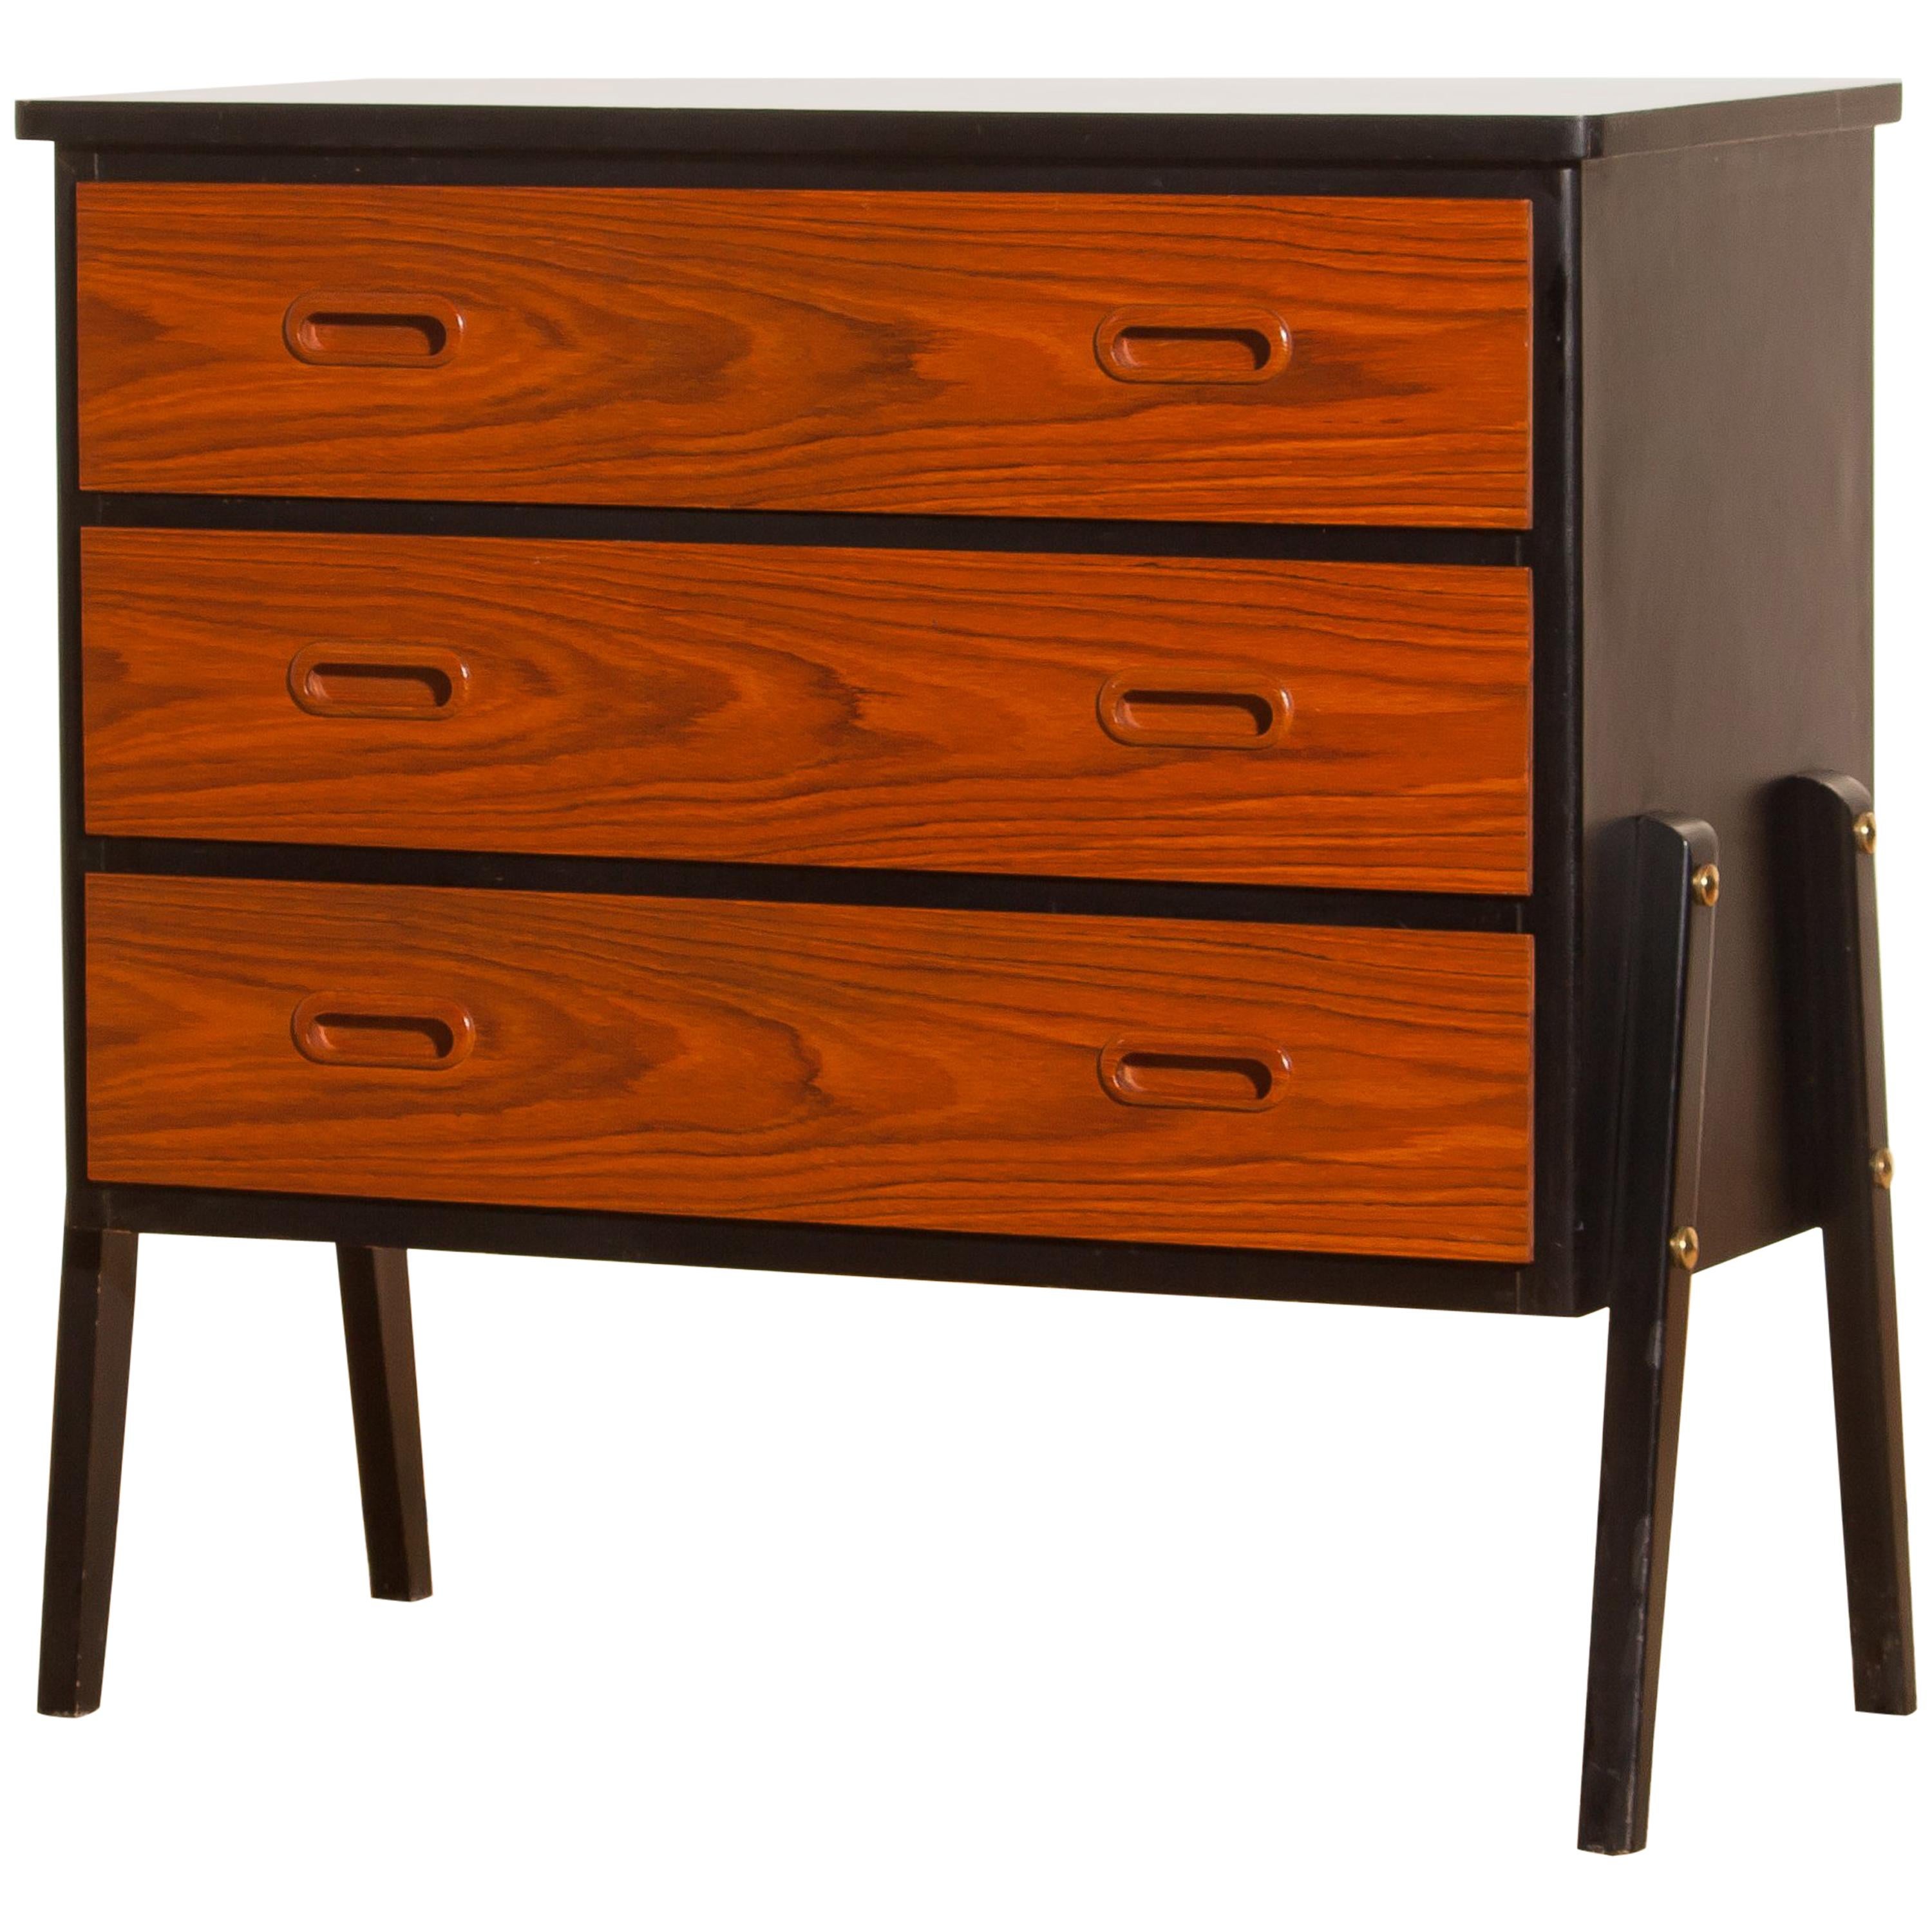 Beautiful small chest of drawers made by Gyllensvaans Möbler, Sweden (marked).
This chest of drawers is made of teak and has three drawers.
It looks great with the black details and is in a very nice condition.
Period 1960s.
Dimensions: H 68 cm,